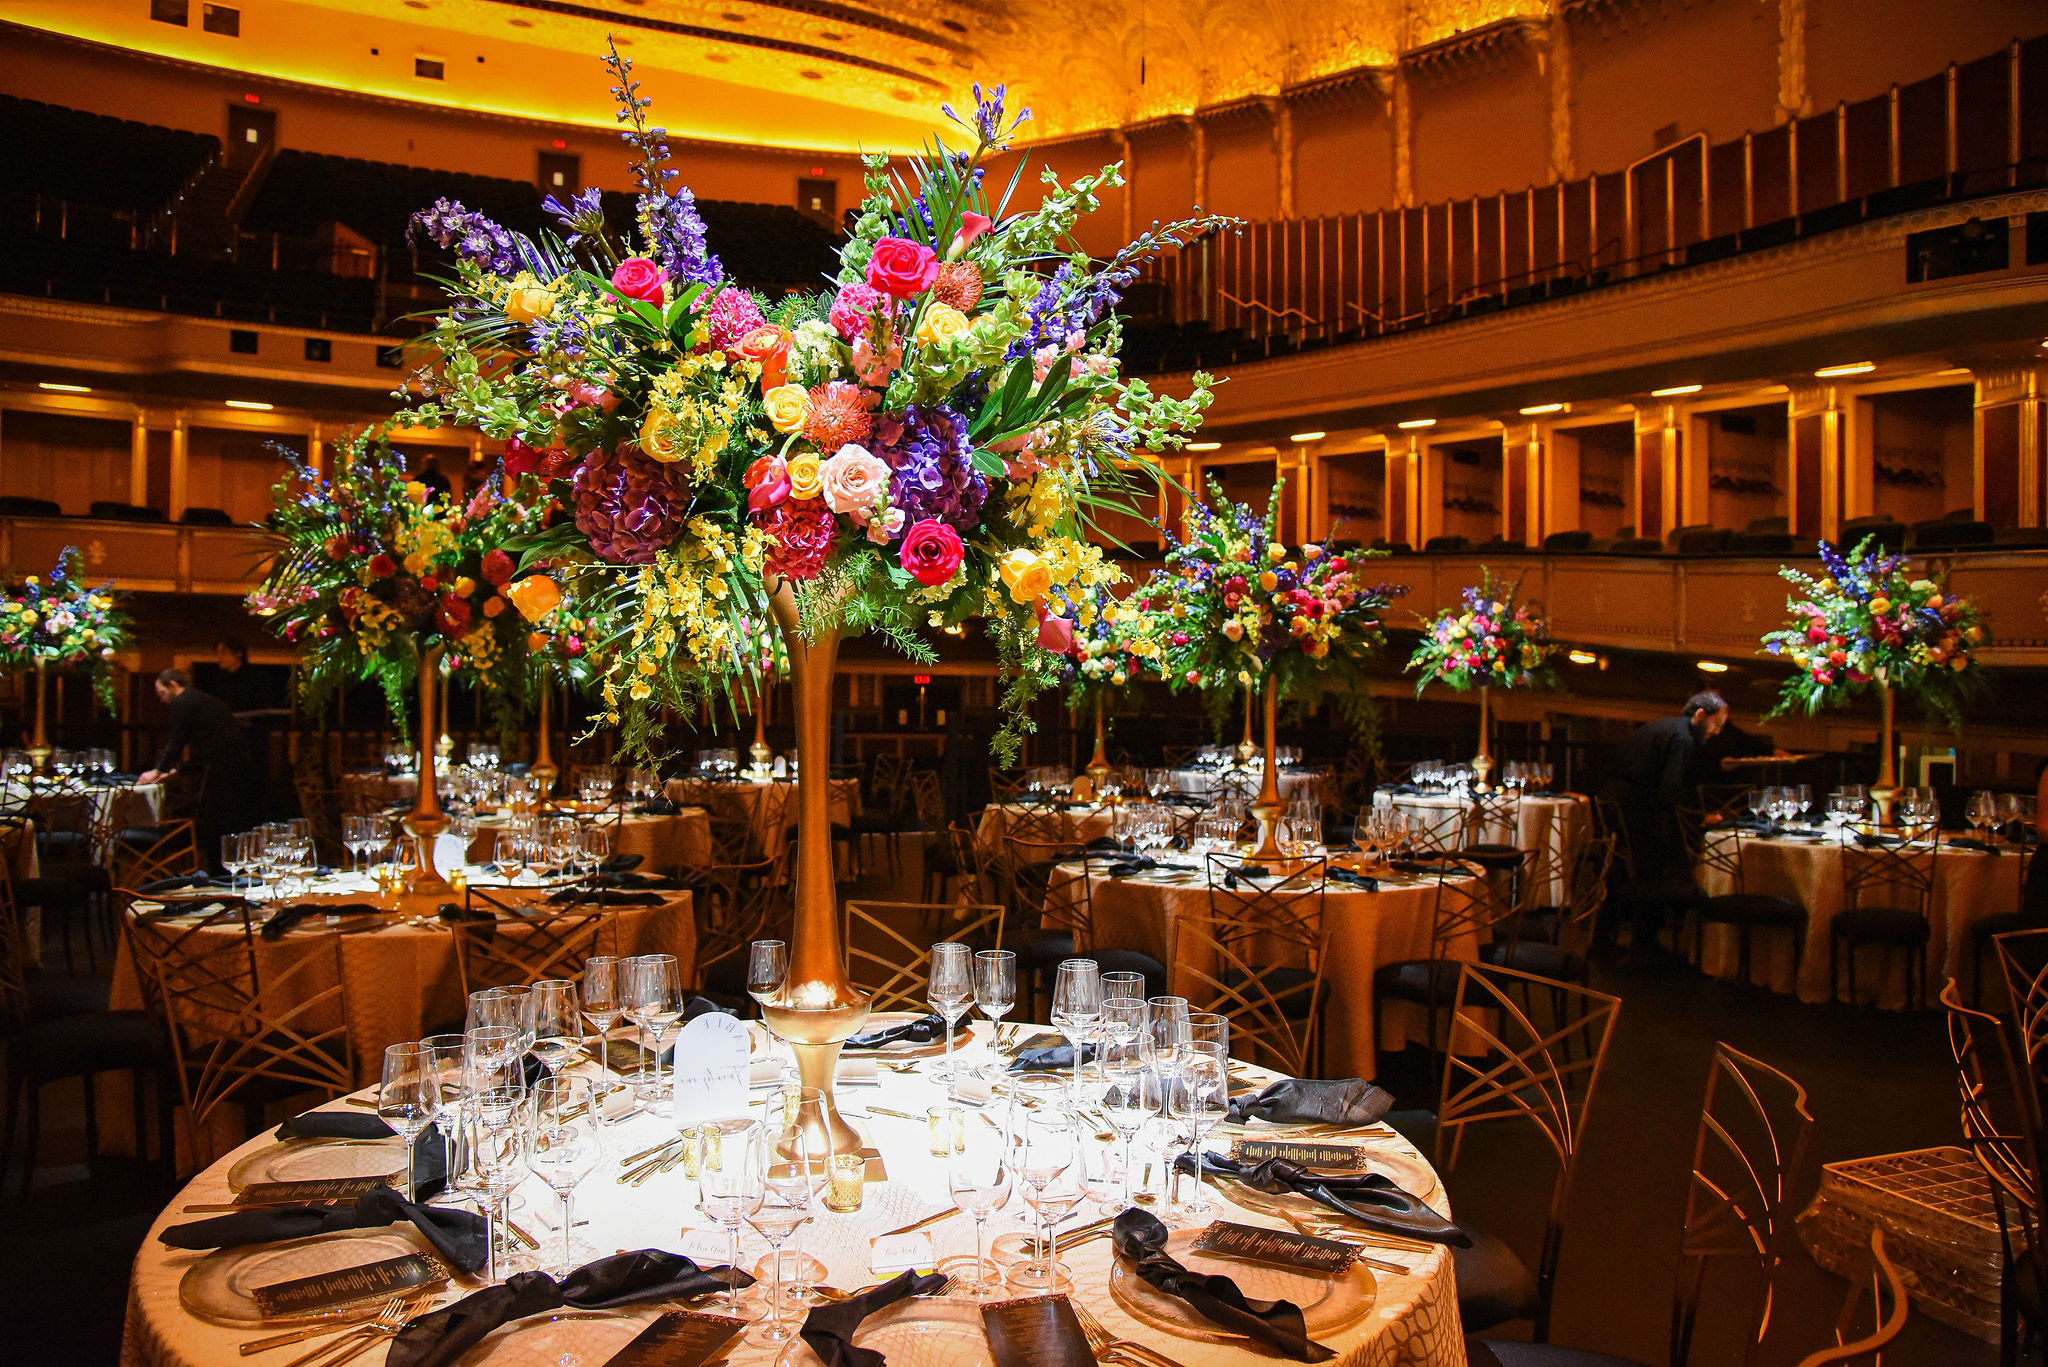 The Cleveland Orchestra Gala Centerpieces on the Concert Hall Stage at Severance Hall, flowers by HeatherLily